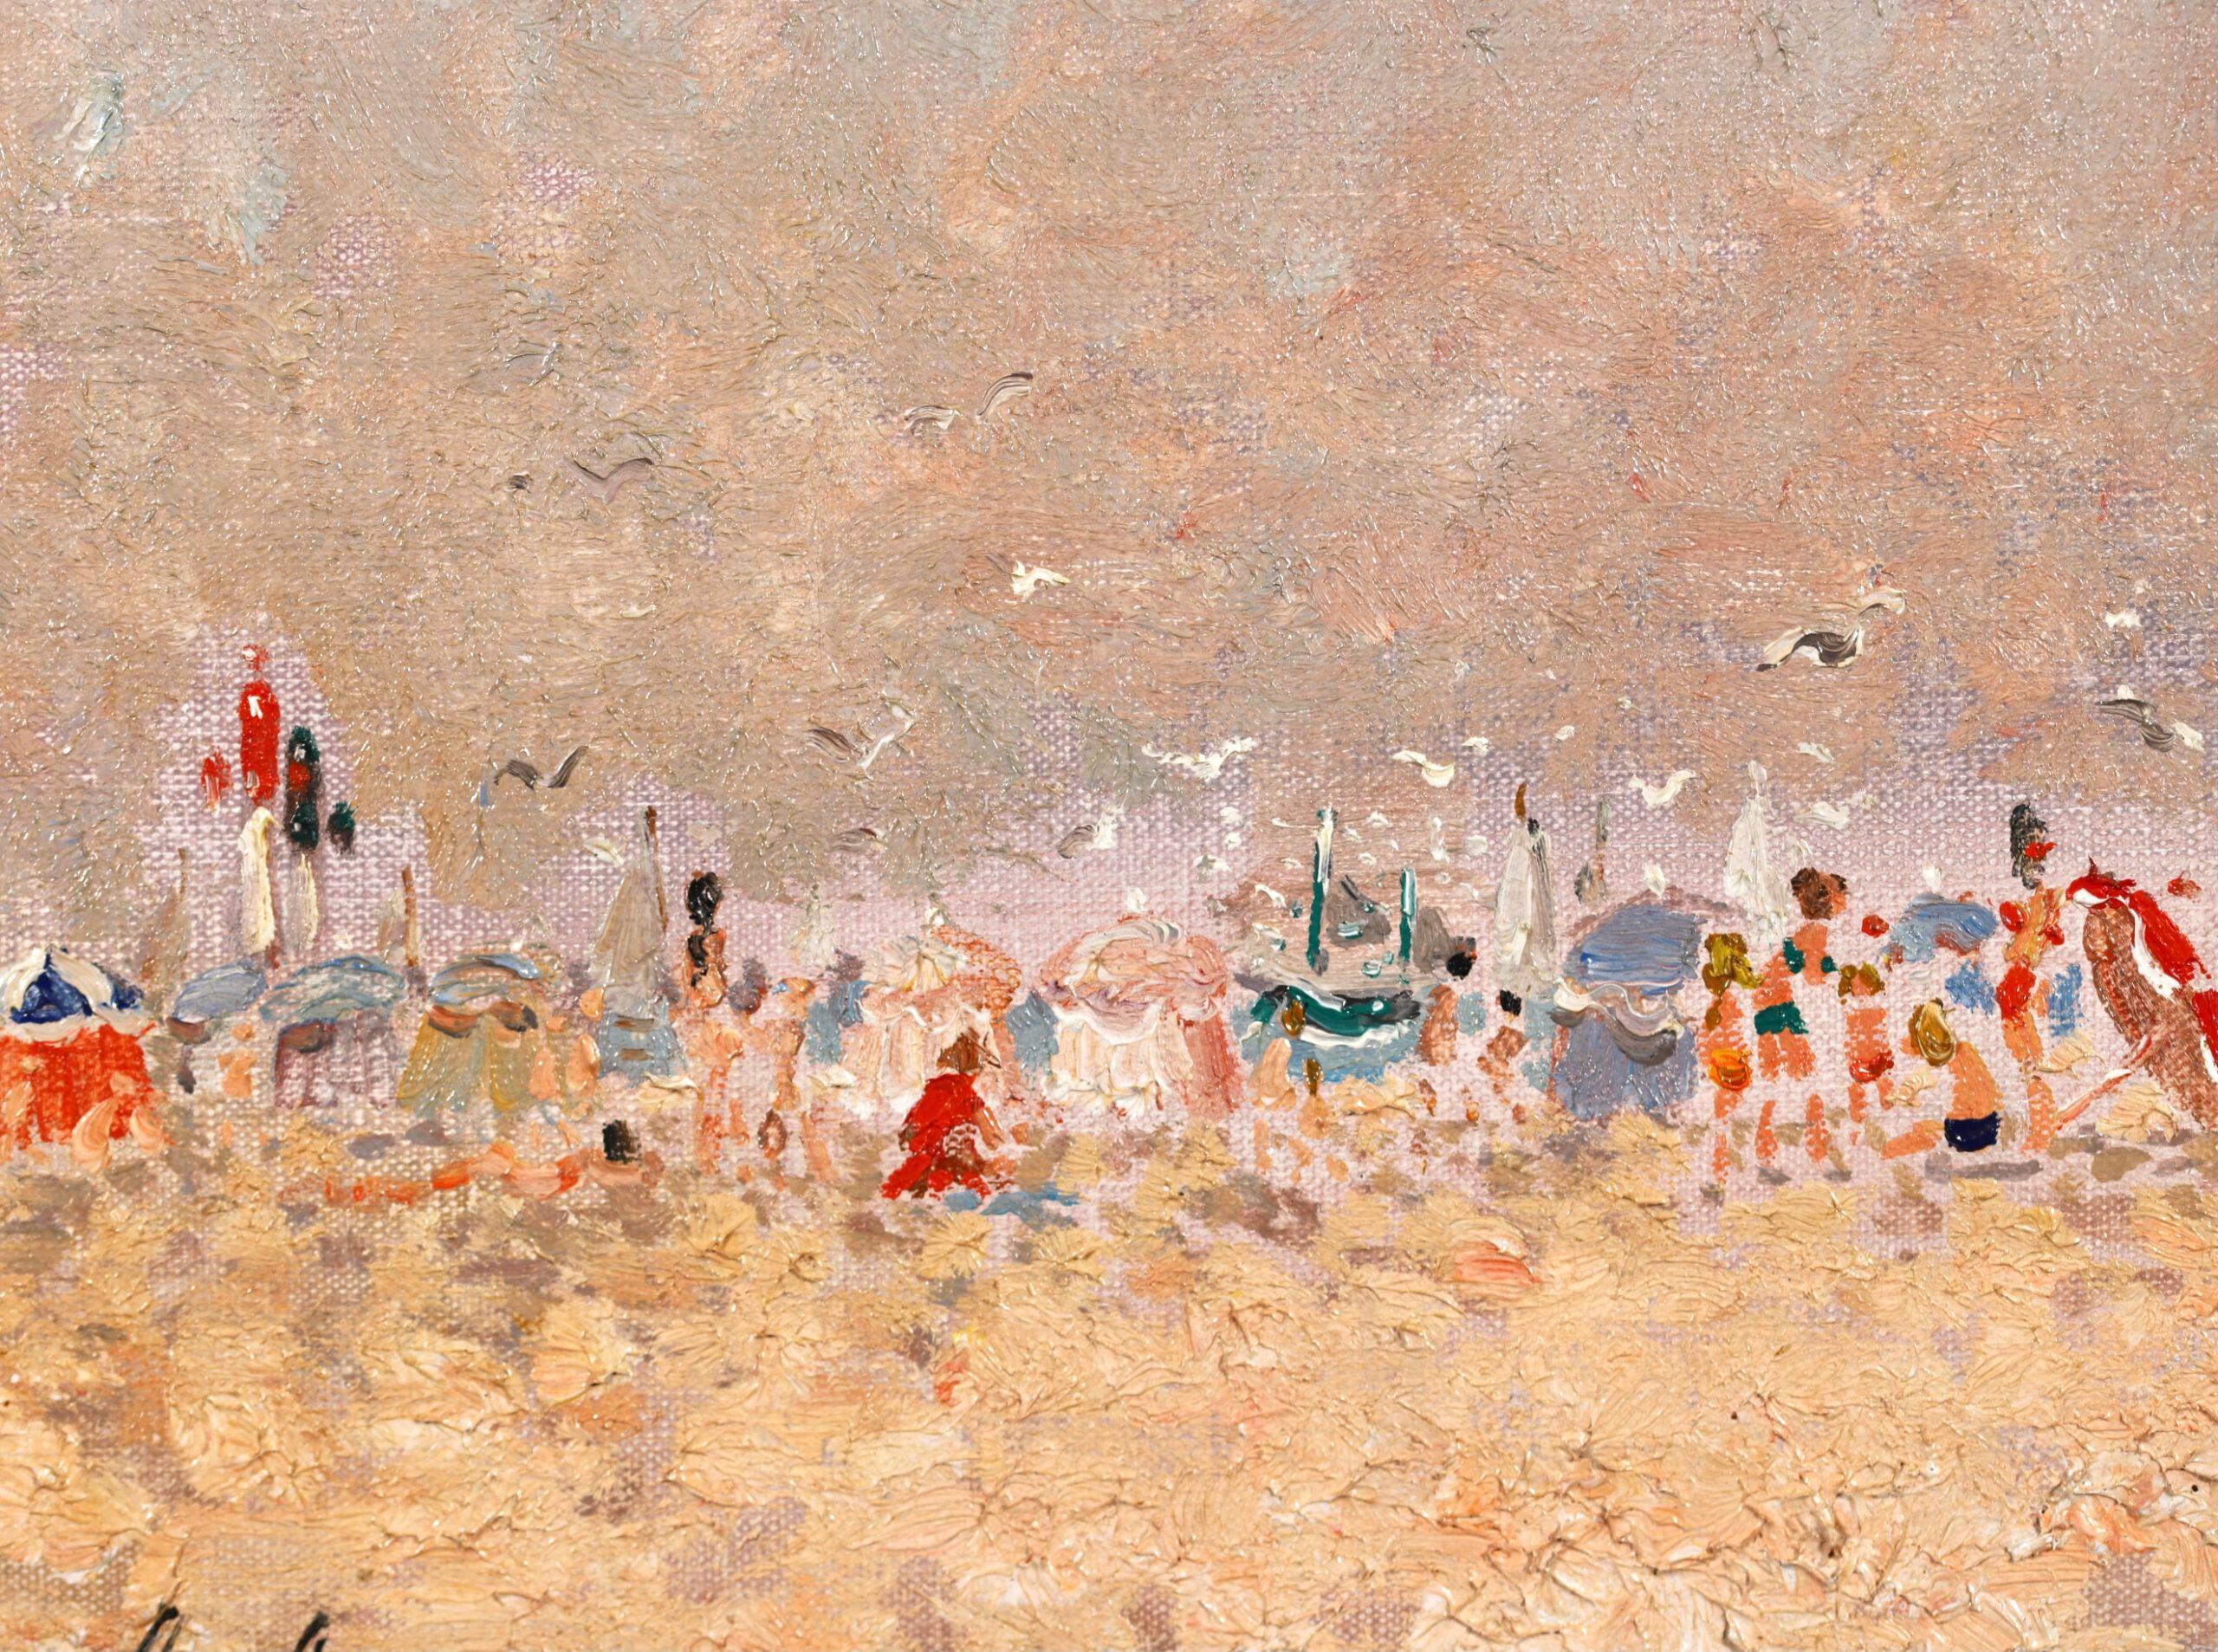 Signed figures in a landscape oil on canvas circa 1980 by French modernist painter Andre Hambourg. This beautiful piece depicts families enjoying a day out at the seaside - bathers rest on the golden sand of the beach in Toruville, France, while